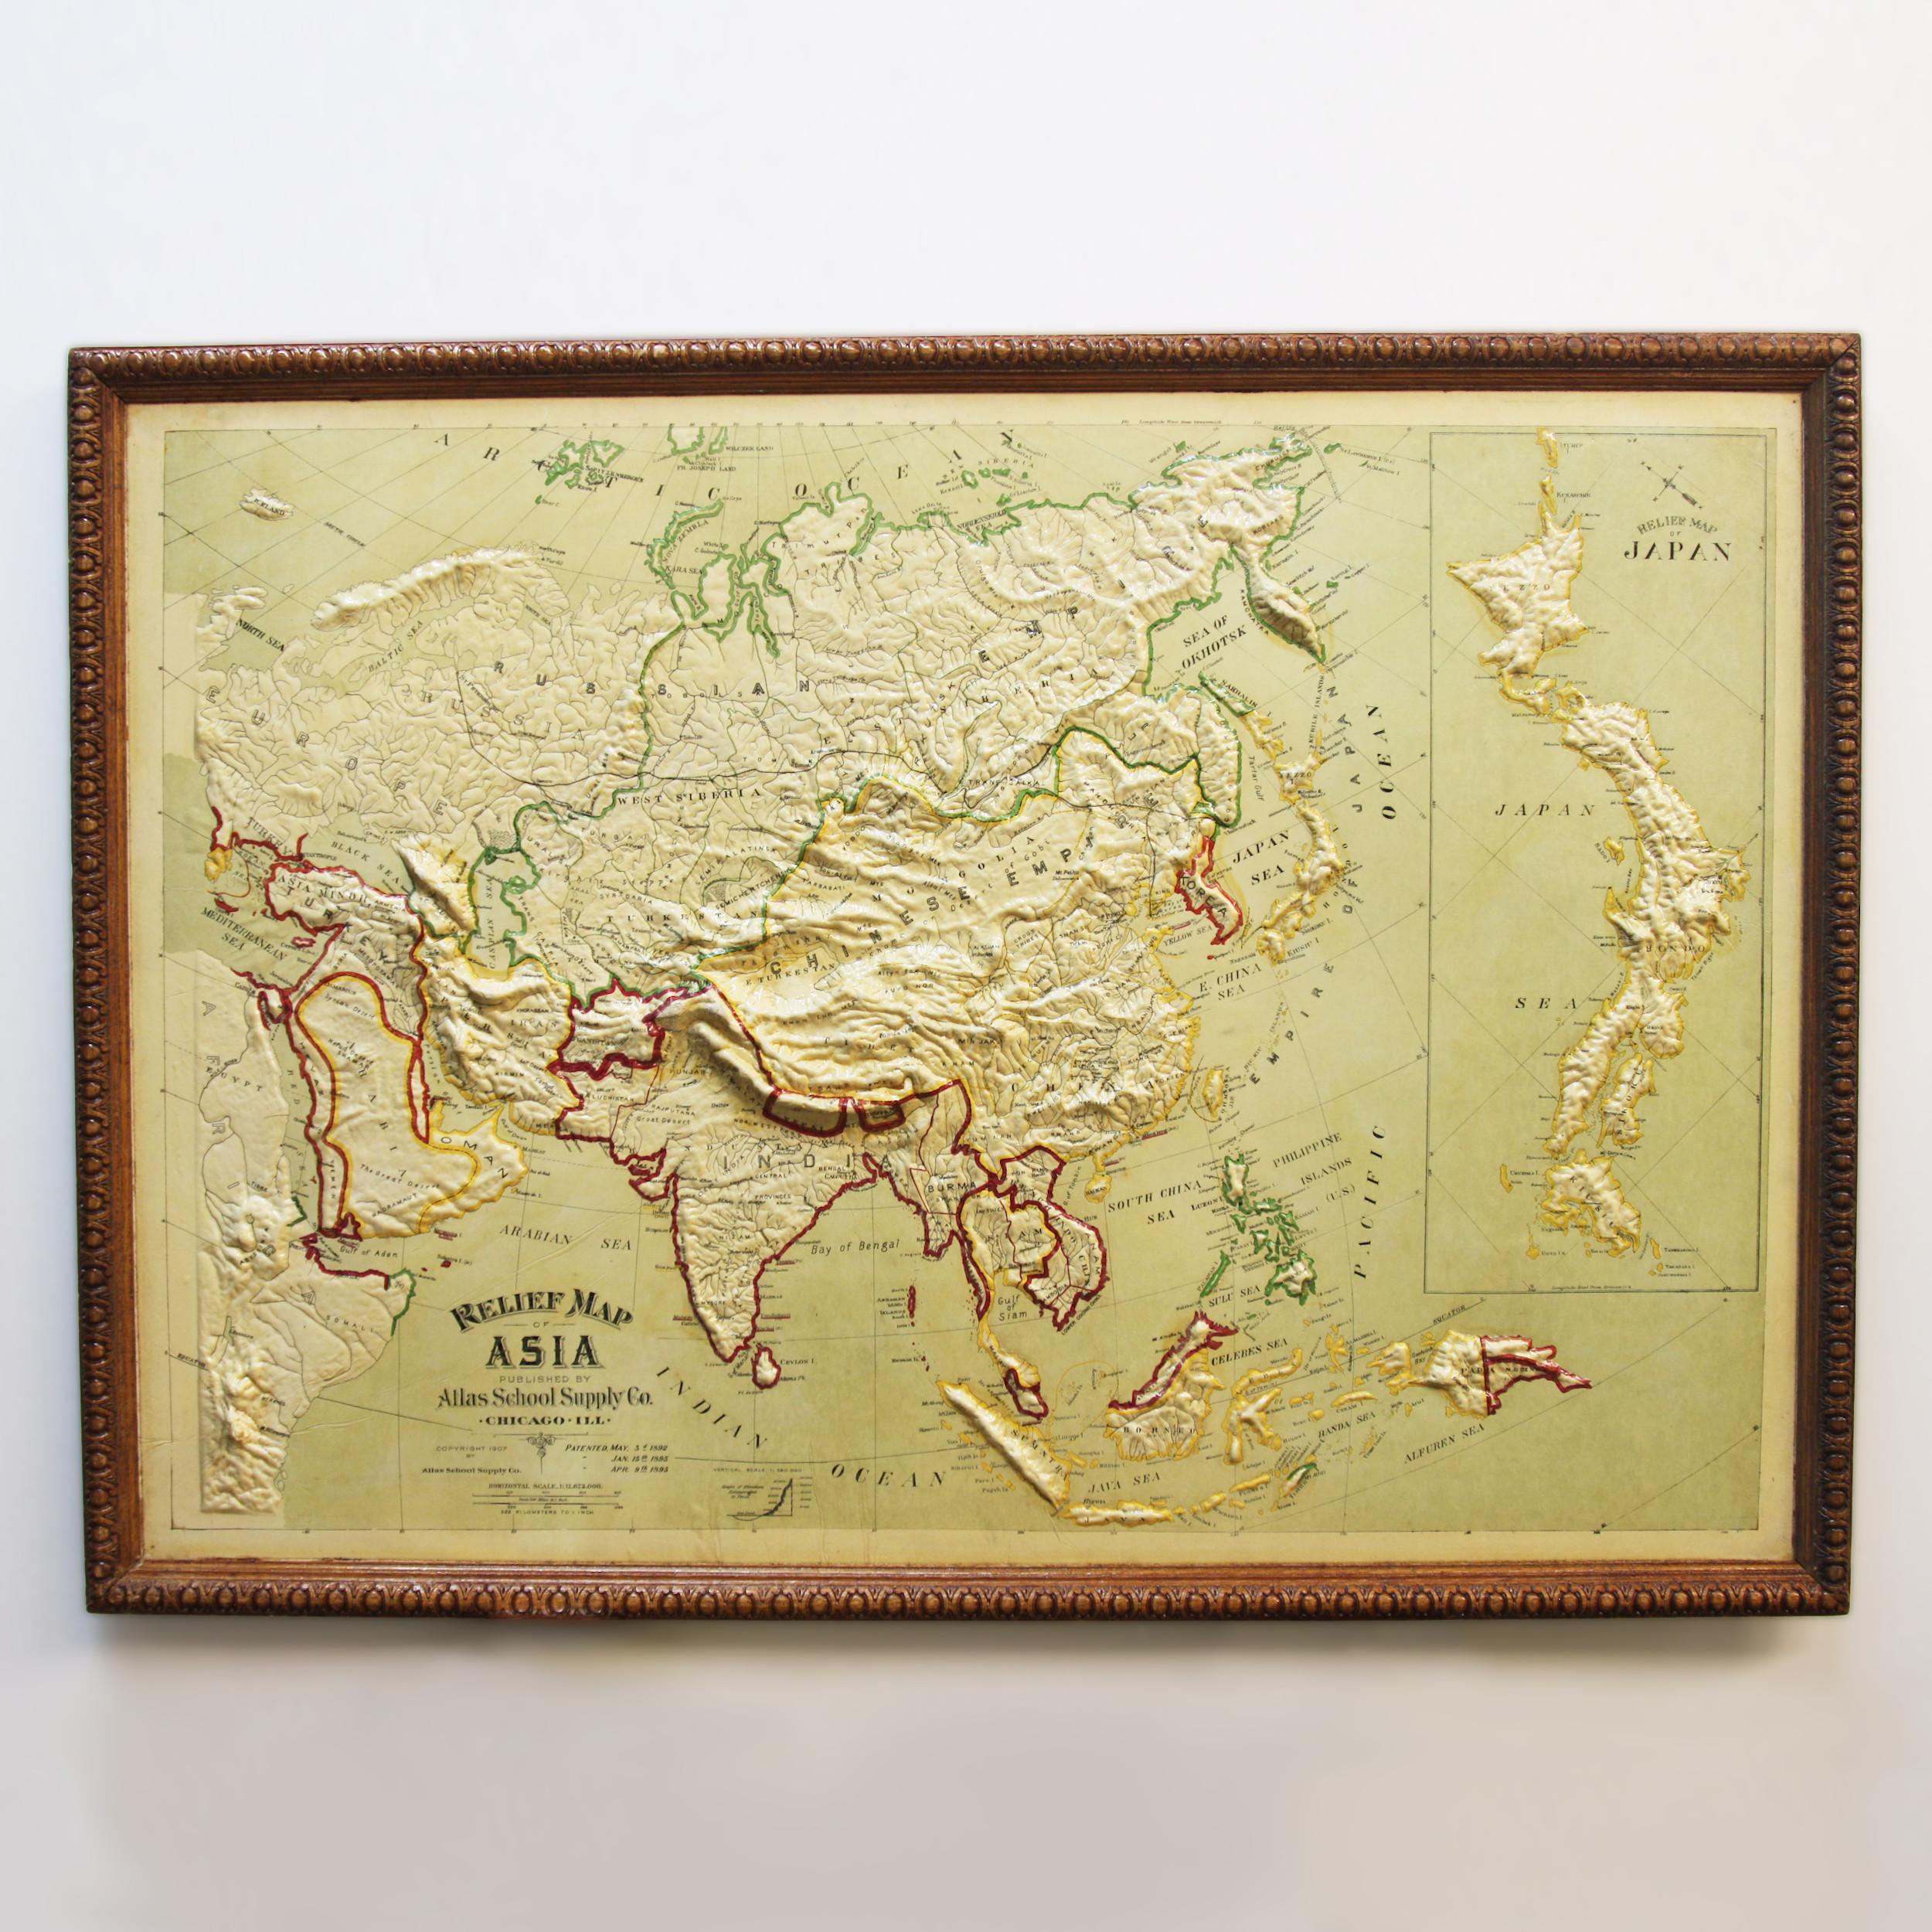 Remarkably original, 1907 Relief map of Asia by the Atlas School Supply Co. of Chicago, Illinois. This is an exceptional quality map features its original oak frame, heavy-duty stretcher, bold graphics and beautifully molded 3-D papier-mâché